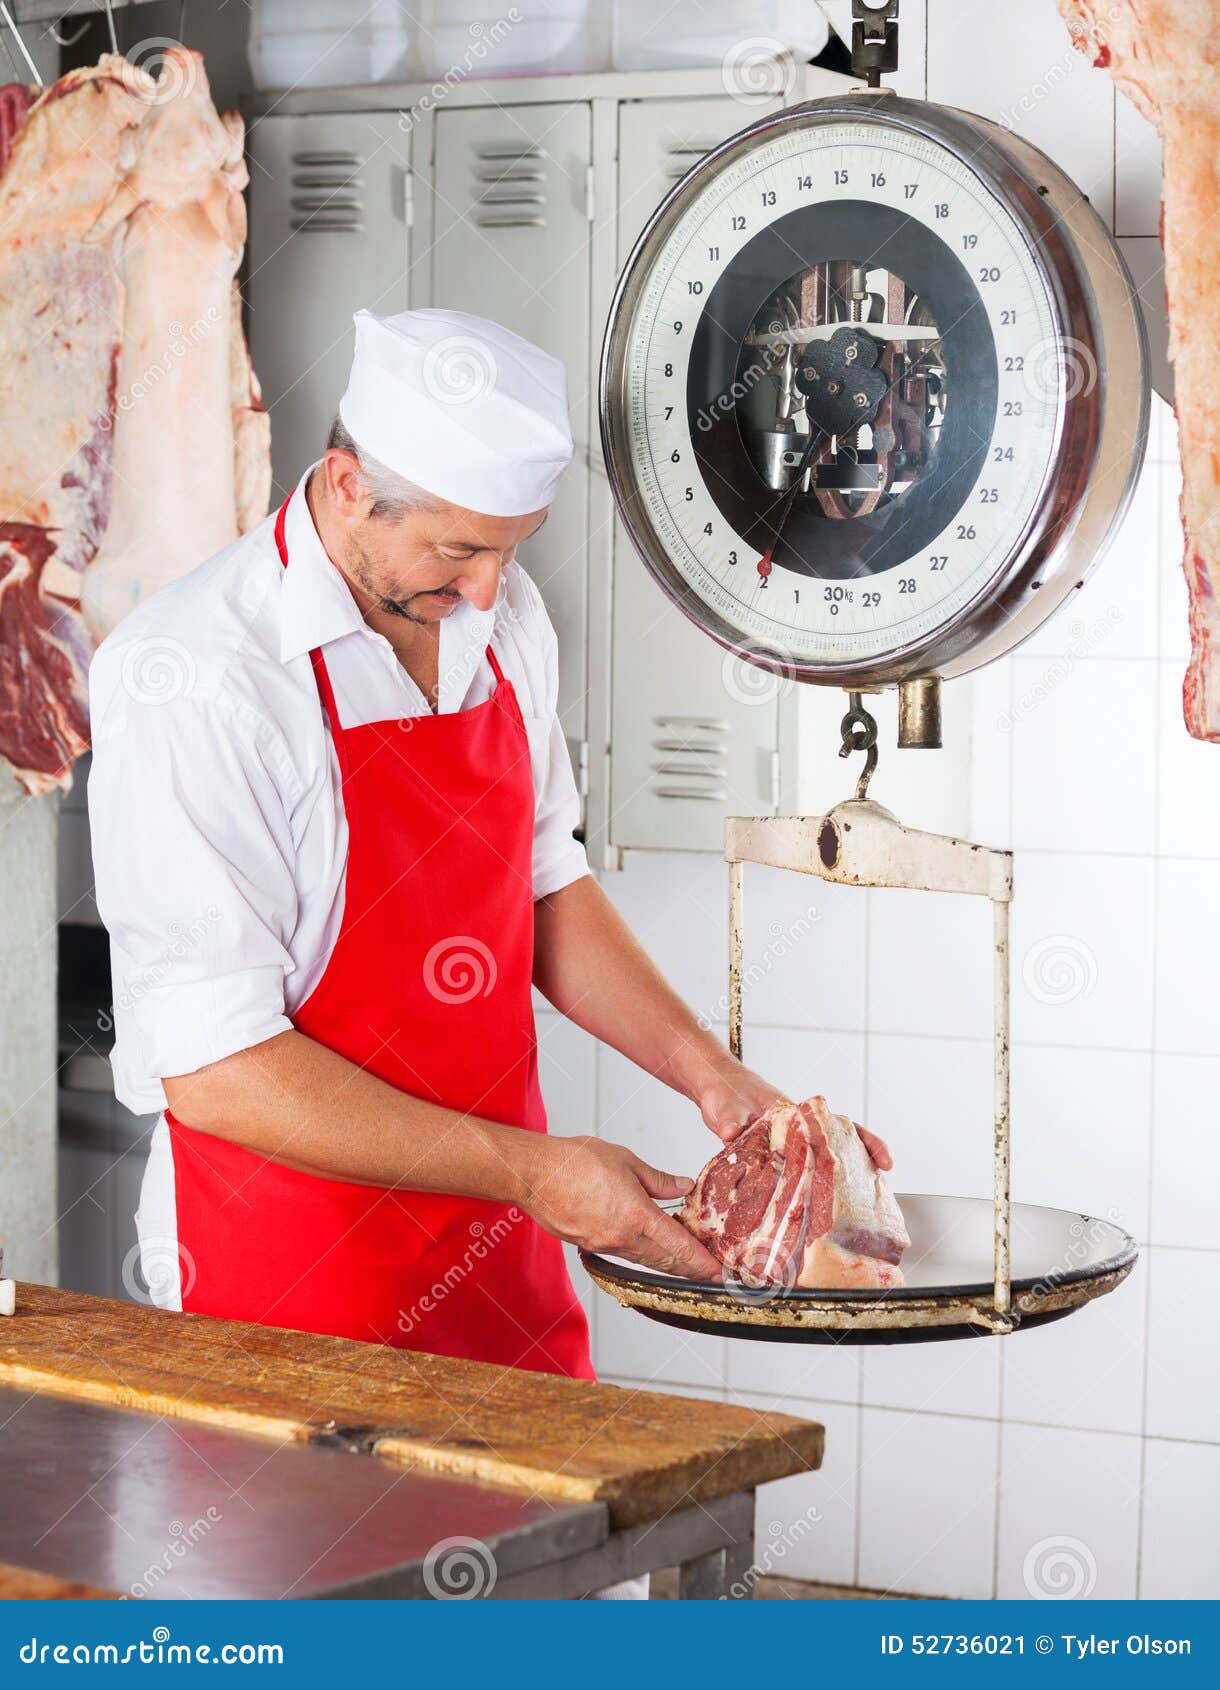 https://thumbs.dreamstime.com/z/butcher-weighing-meat-scale-counter-male-butchery-52736021.jpg